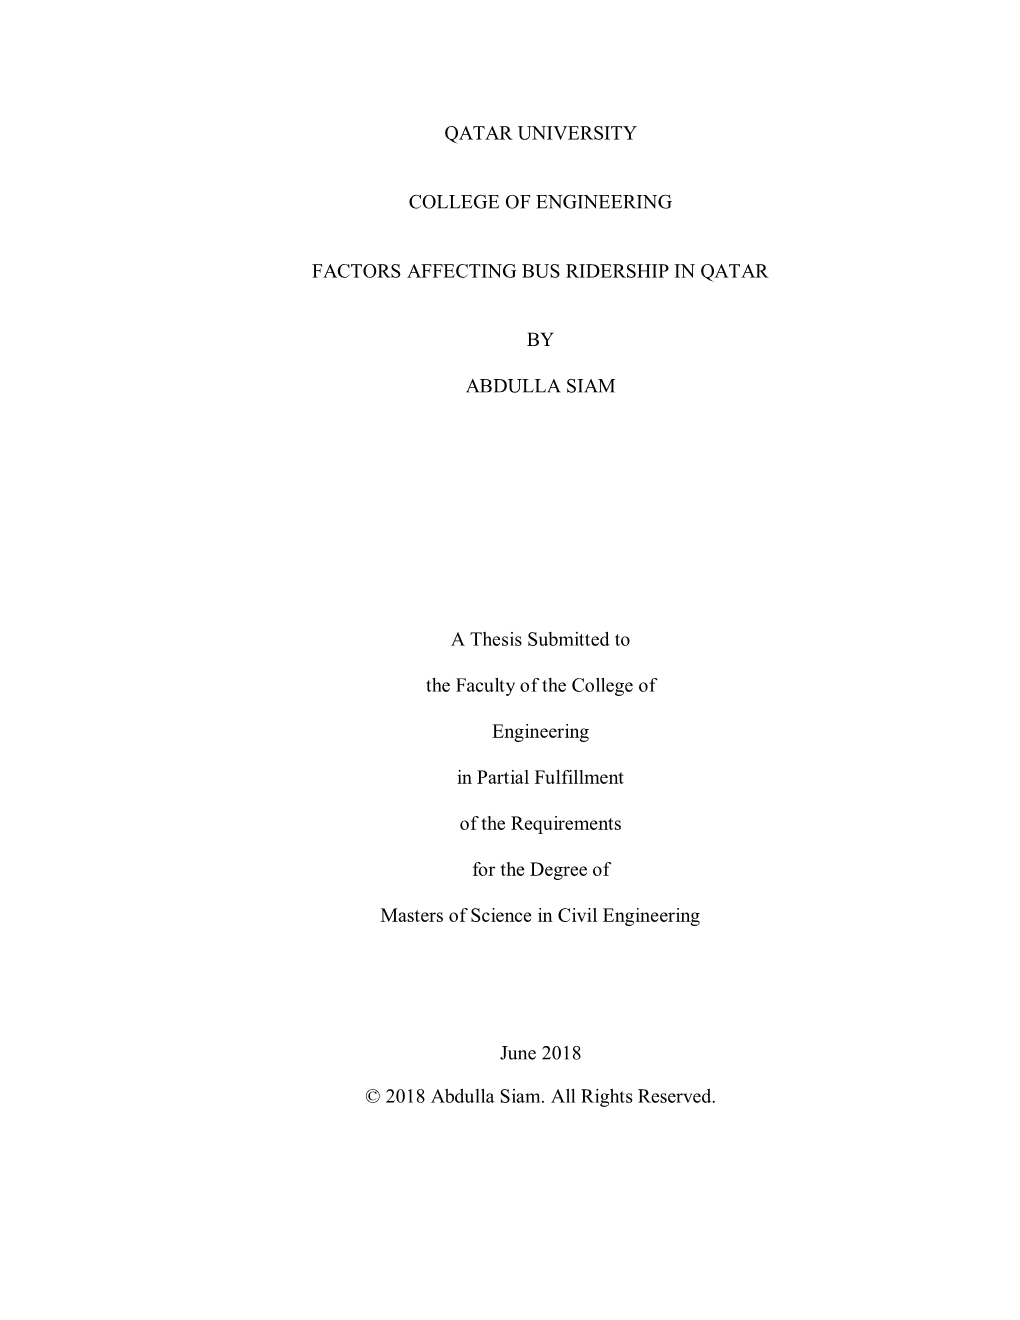 Abdulla Siam OGS Approved Thesis .Pdf